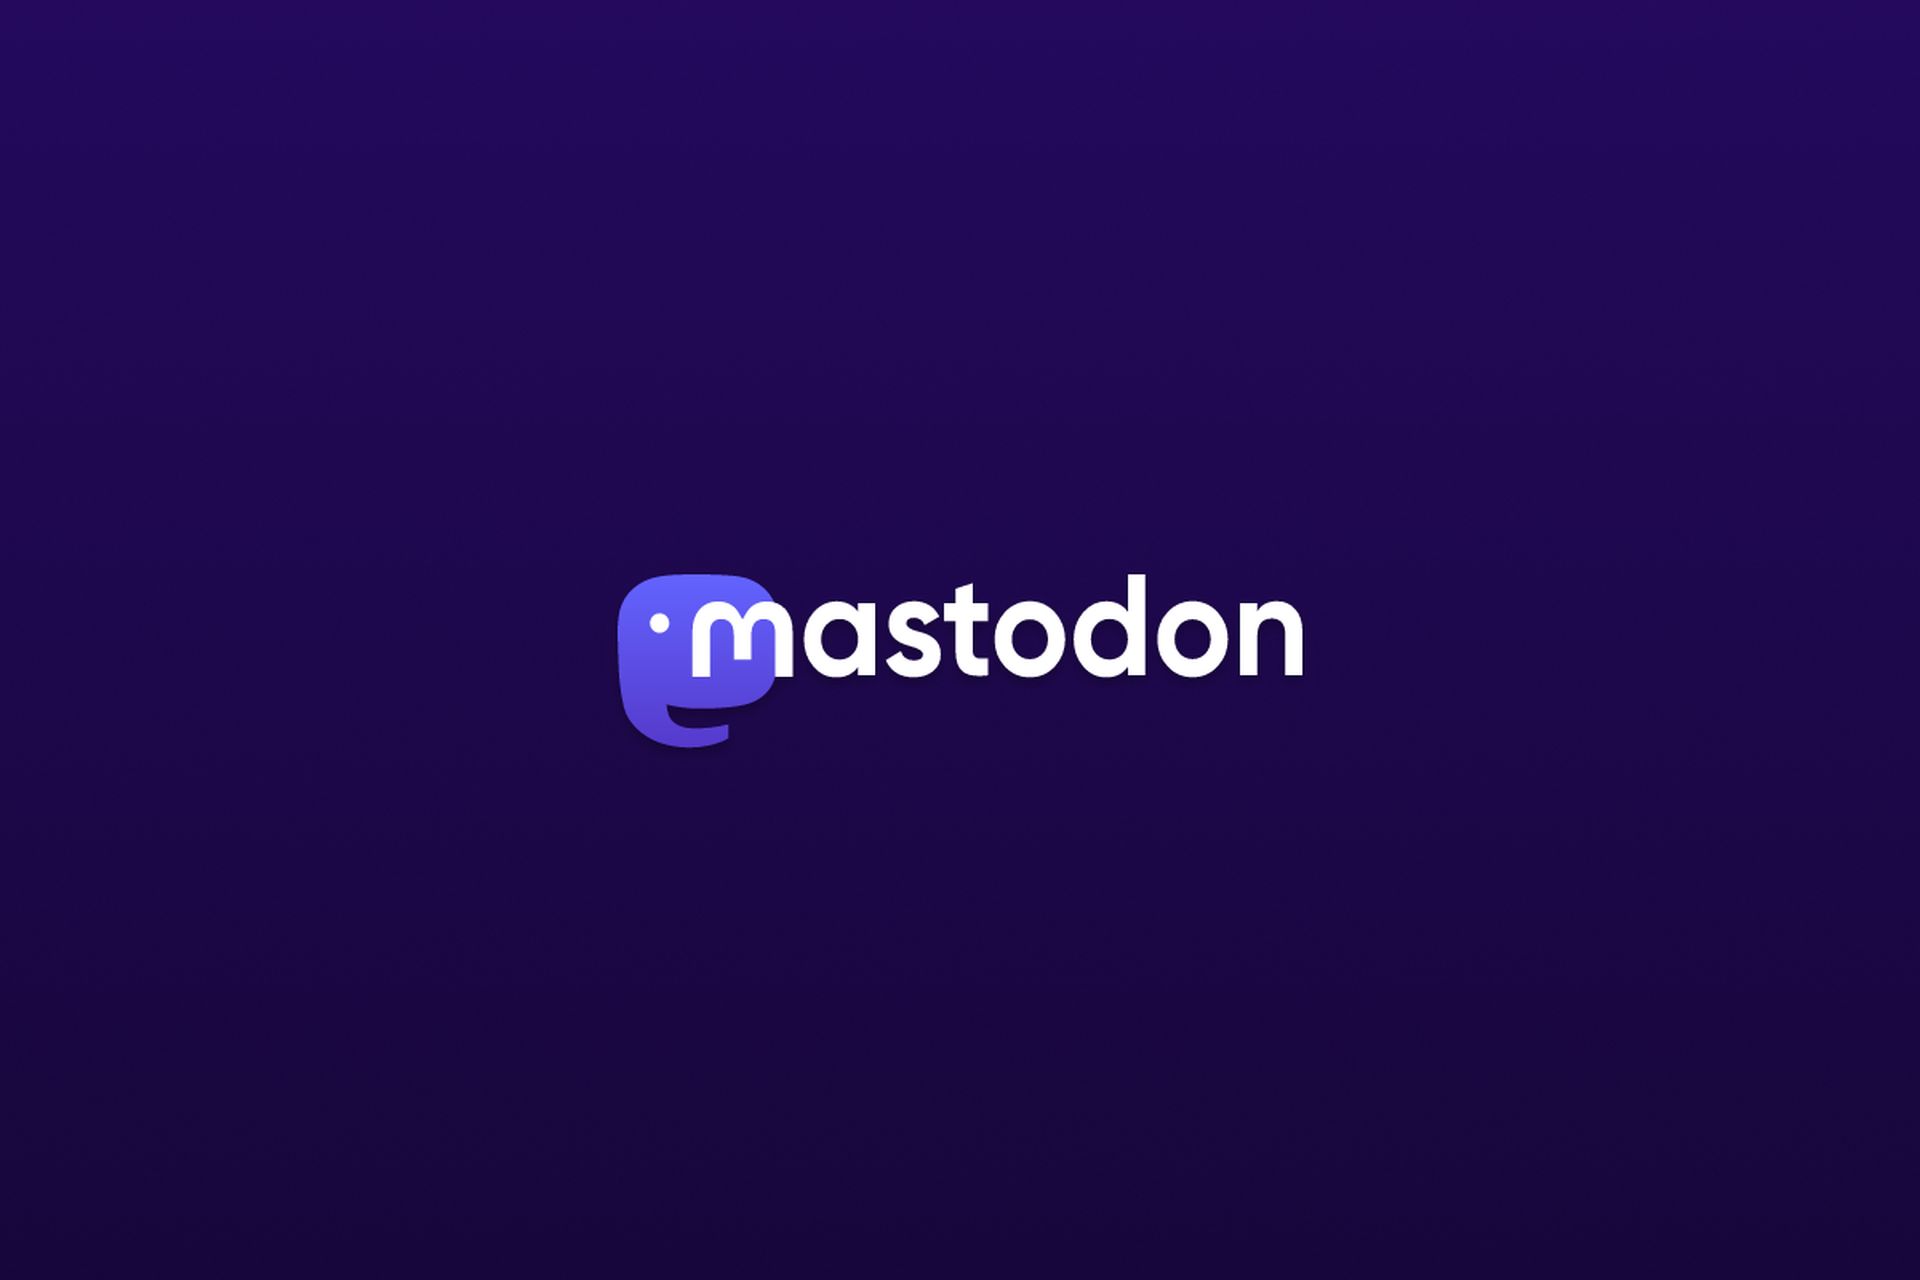 Bluesky and Mastodon: Technical differences